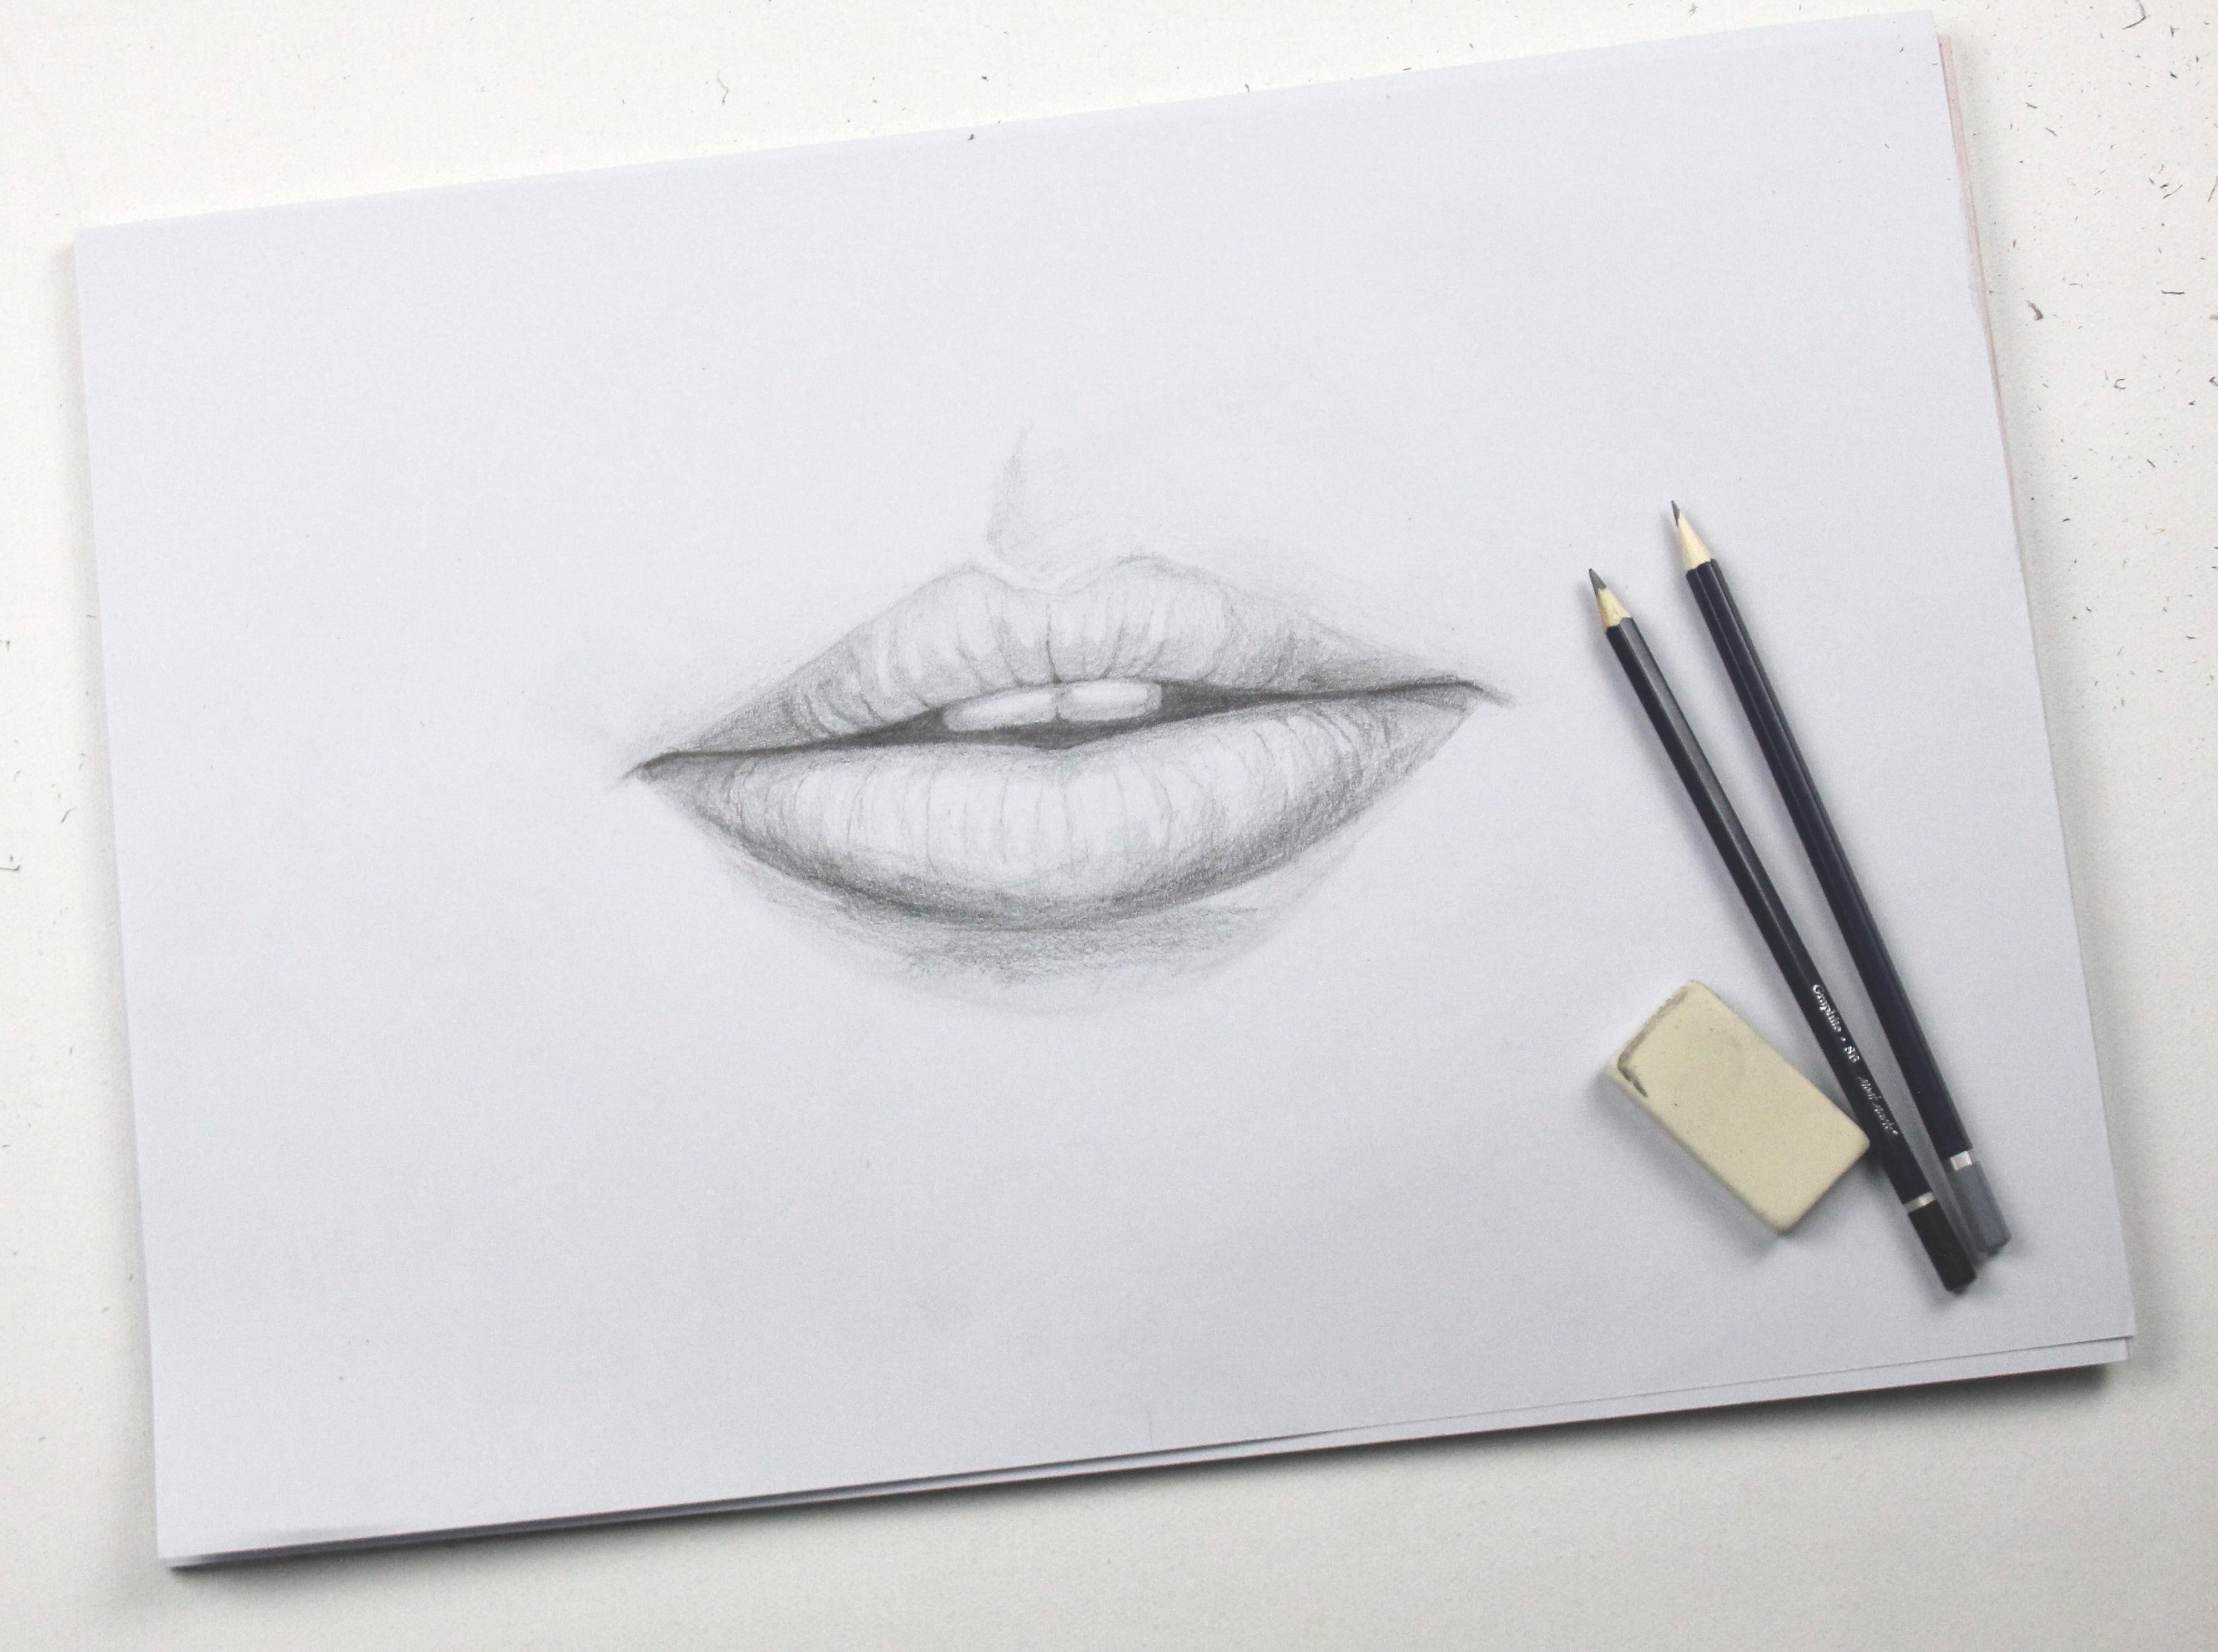 Drawing of lips drawn in graphite on white paper next to two pencils and an eraser.